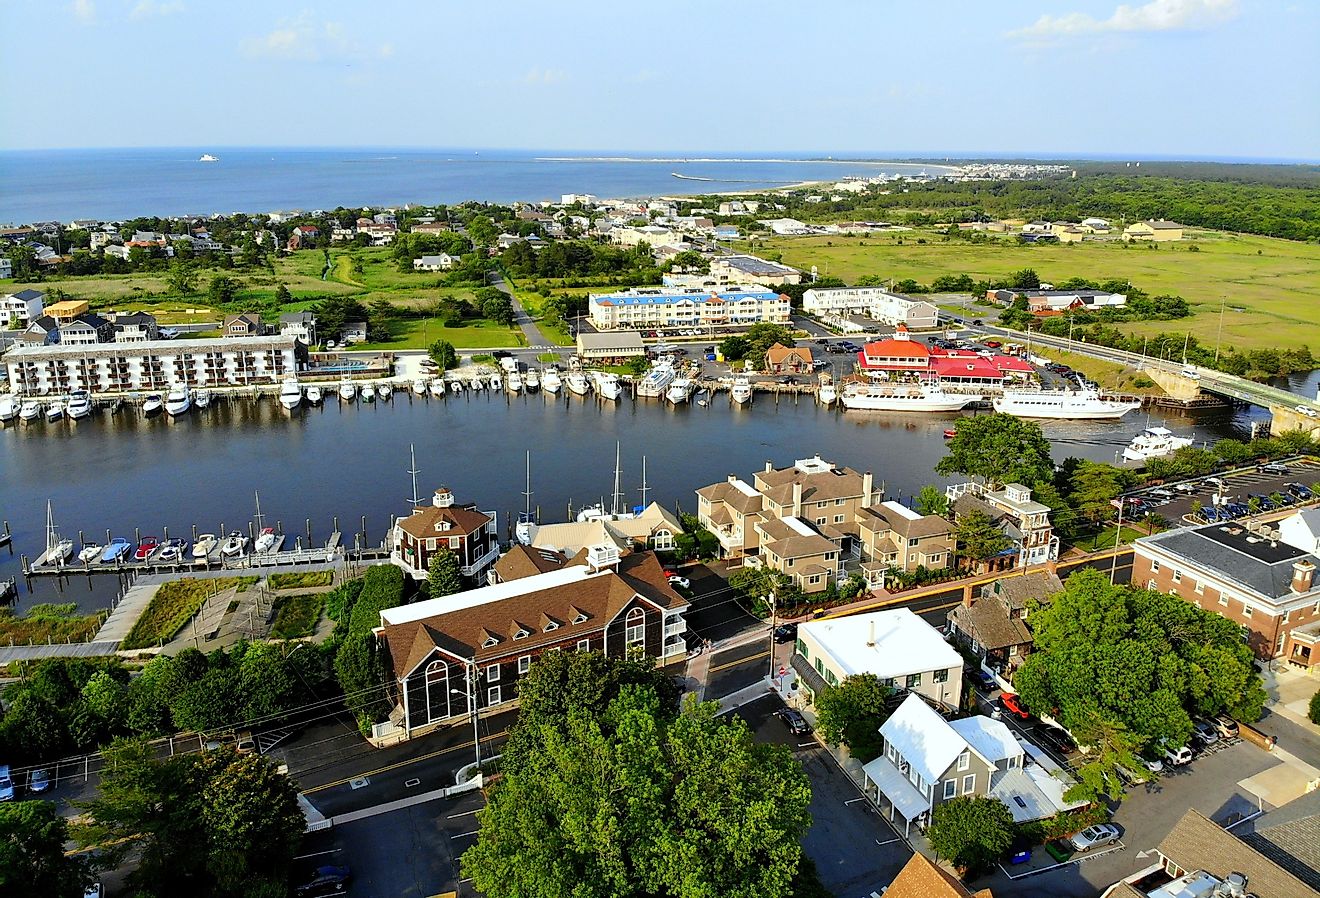 Aerial view of Lewes, Delaware, fishing port and waterfront residential homes along the canal. Image credit Khairil Azhar Junos via Shutterstock